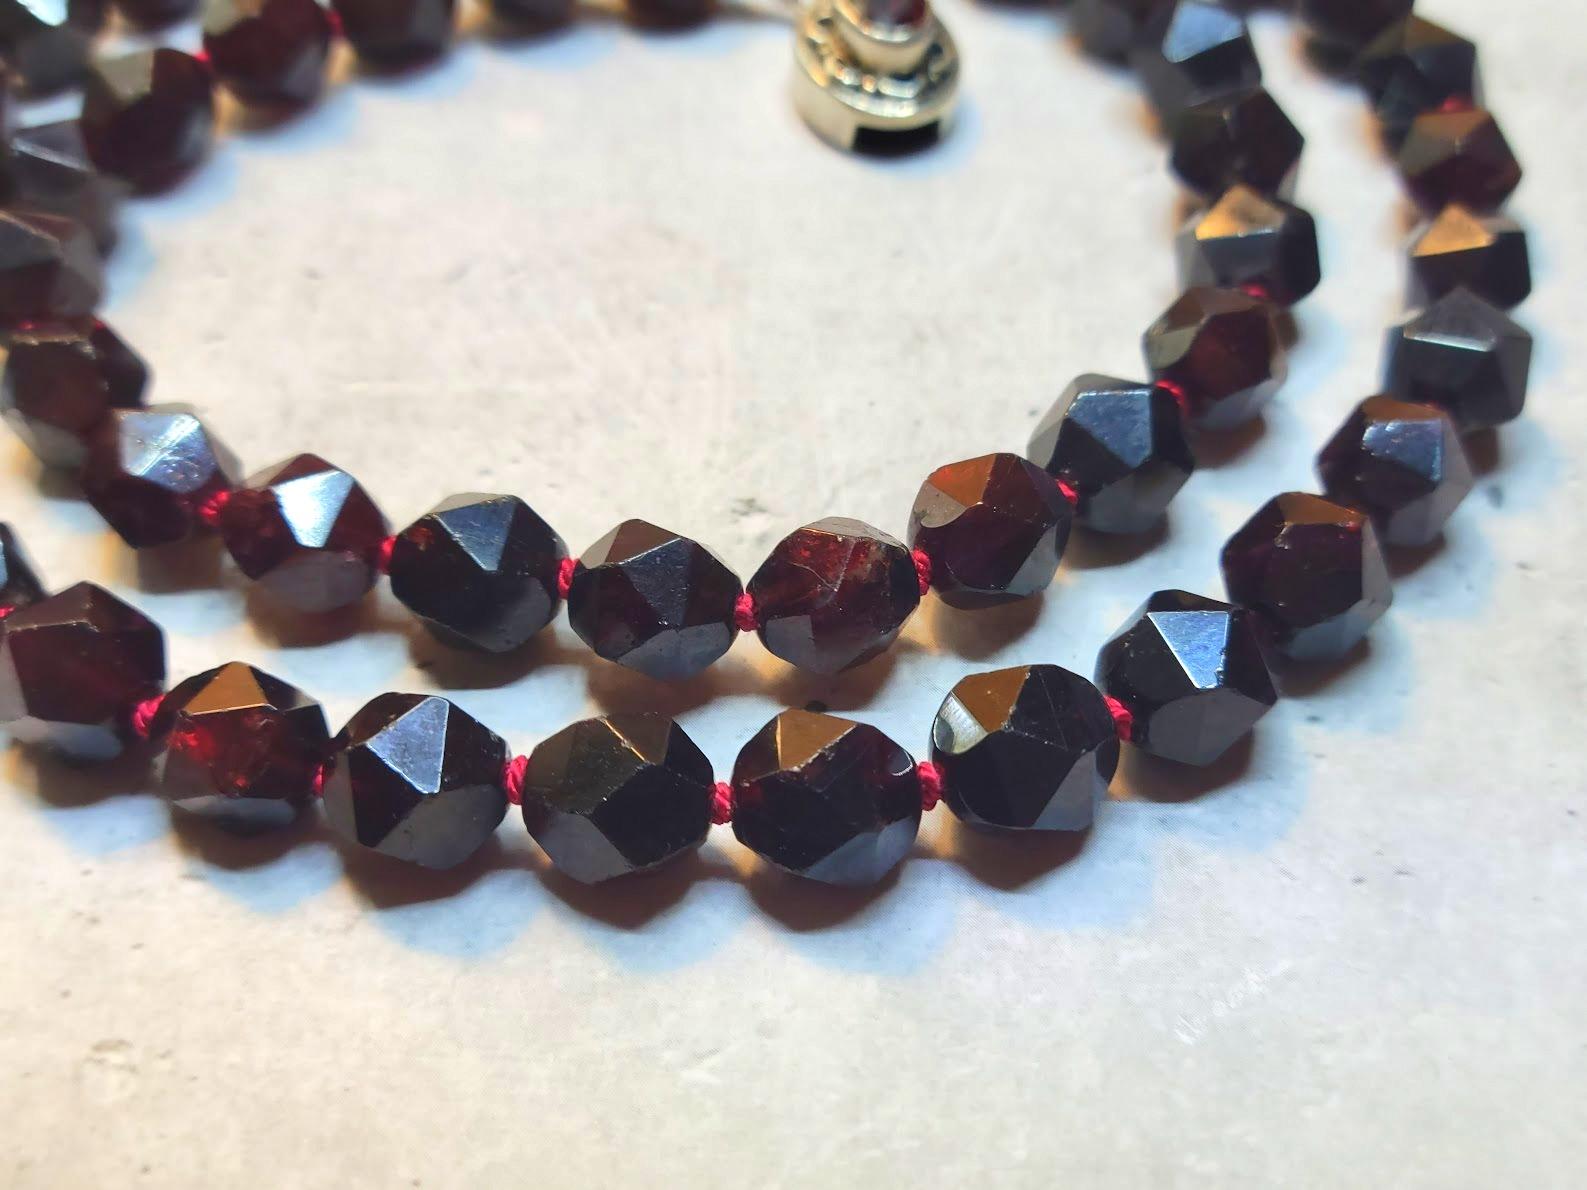 The length of the necklace is 22 inches (56 cm). The size of the faceted beads is 10 mm.
Beads are a hand-faceted, deep-saturated, uniform color. The color of the beads is authentic and natural. No thermal or other mechanical treatments were